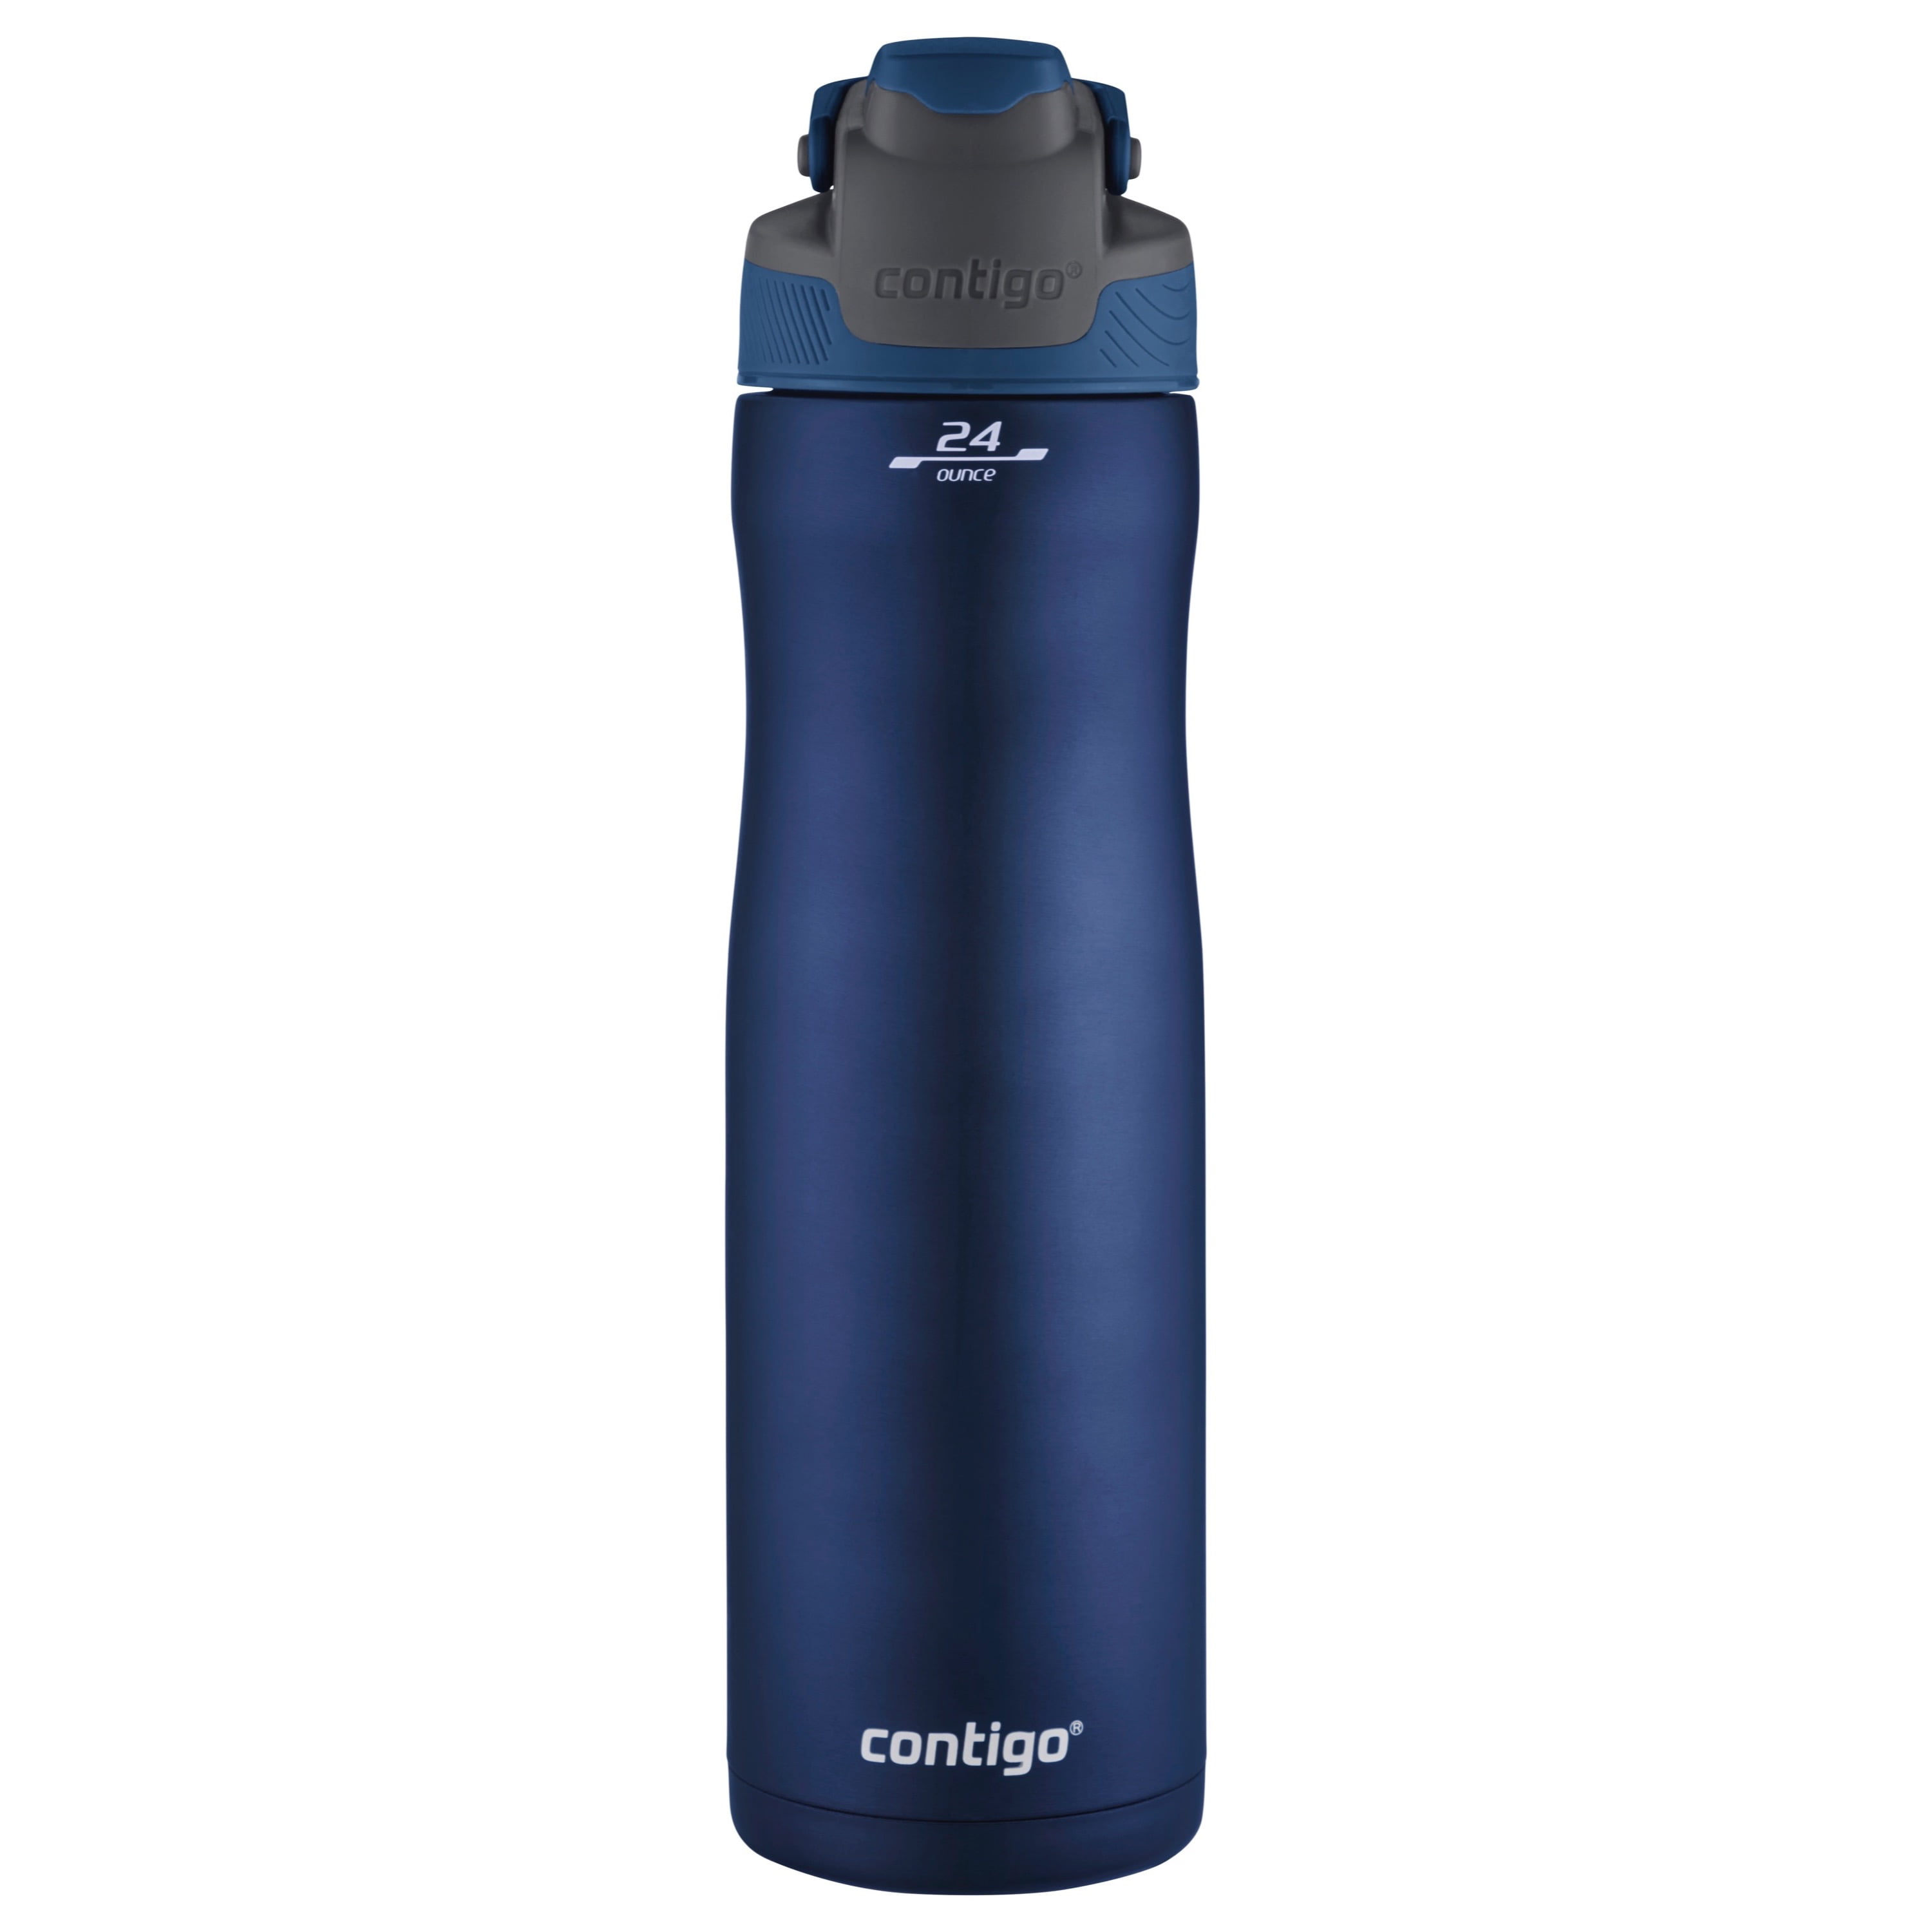 Contigo Auto Seal Stainless Steel Water Bottle (24 oz) Delivery